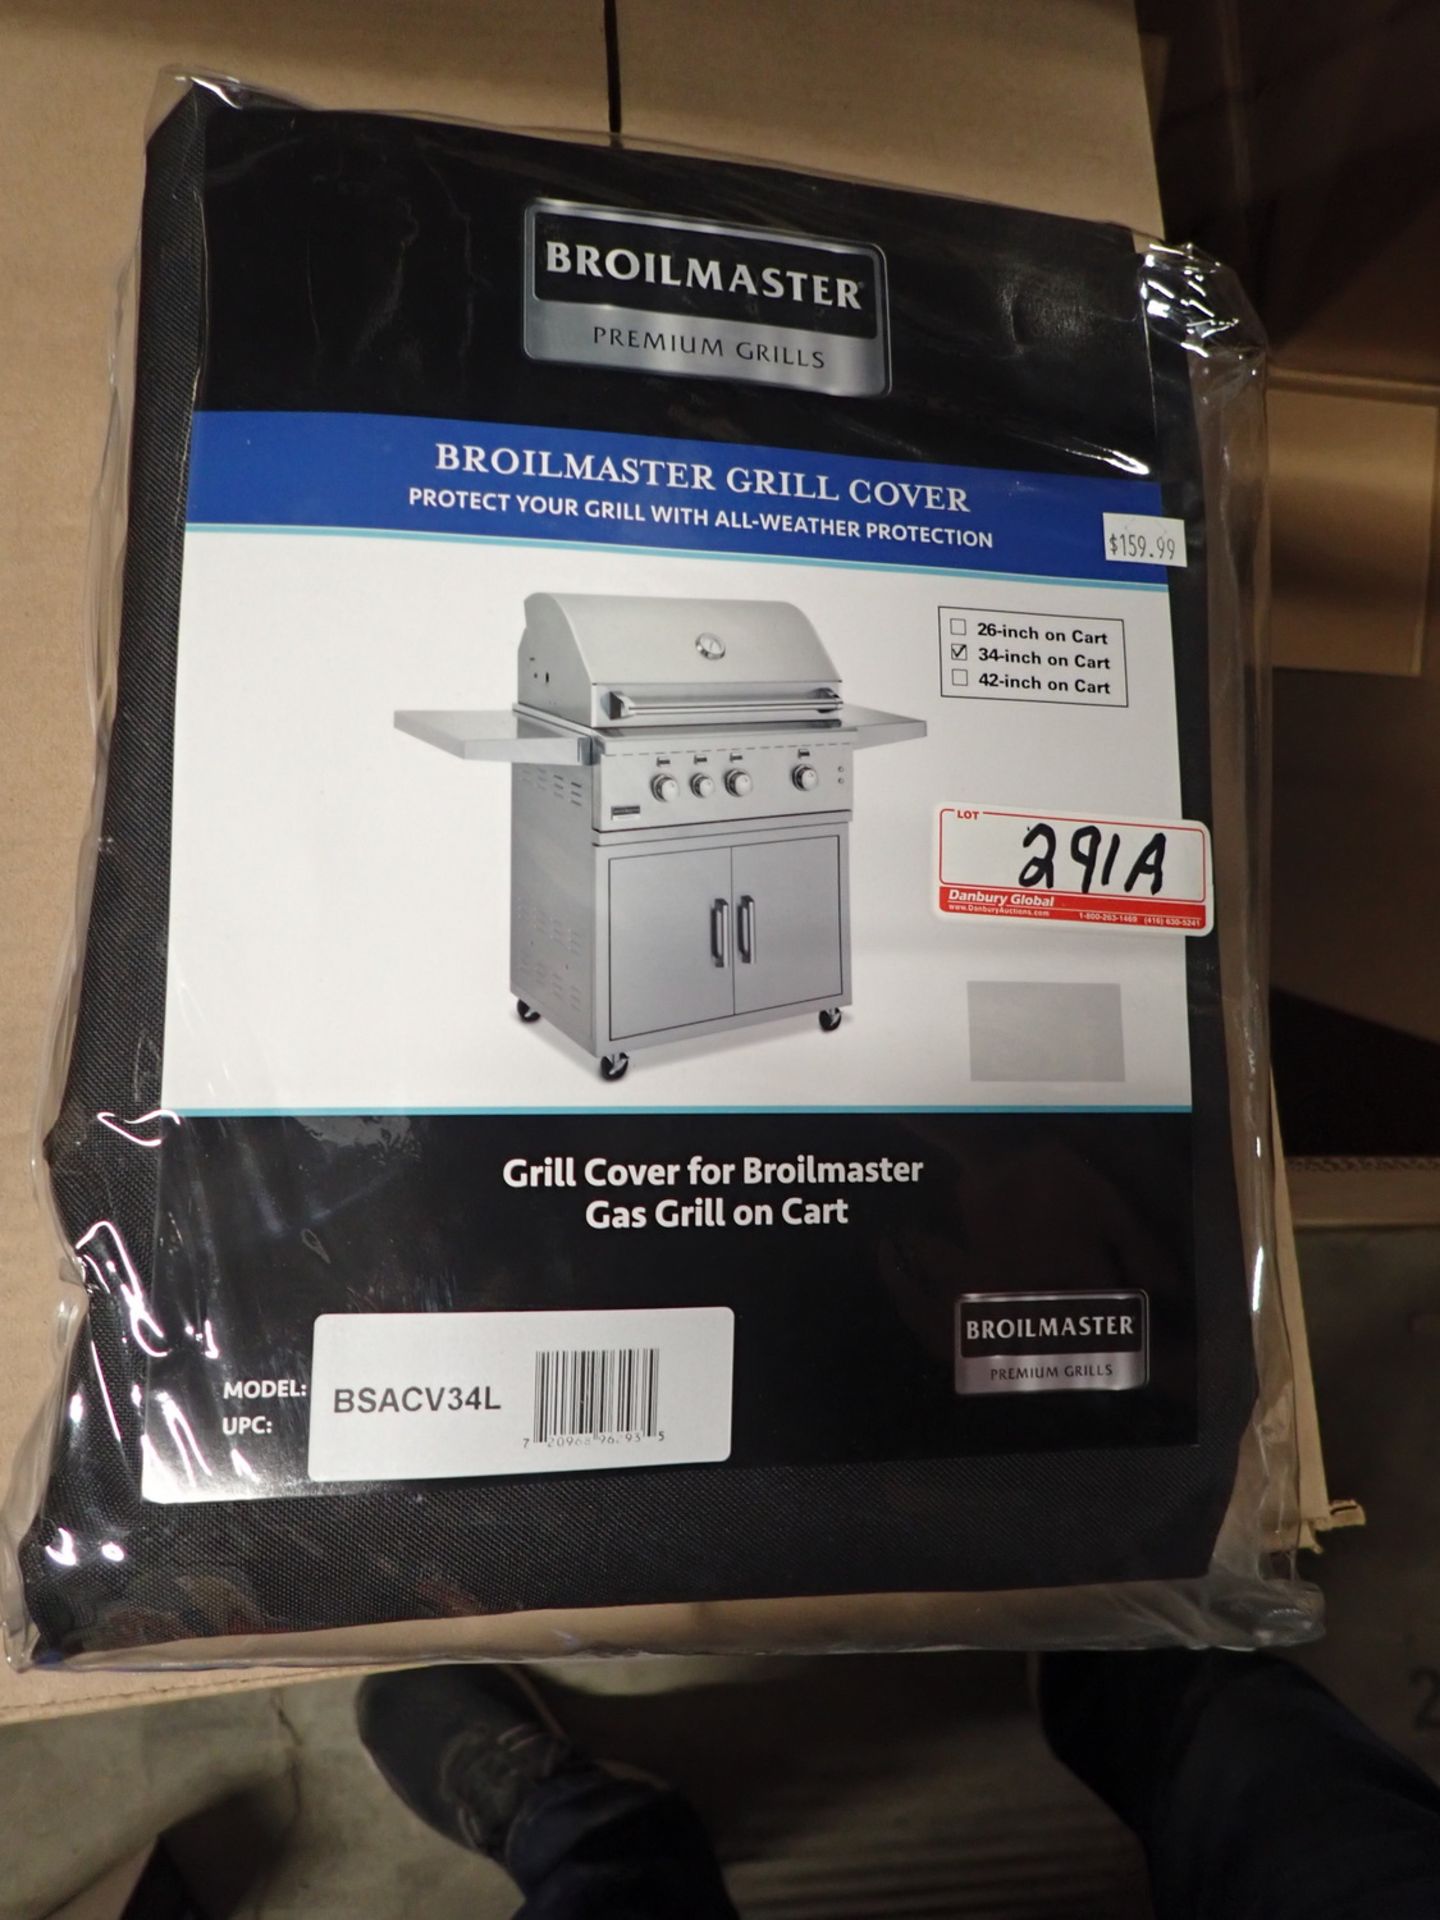 UNITS - BROILMASTER GRILL COVER FOR 34" ON CART (RETAIL $159.99 EA)